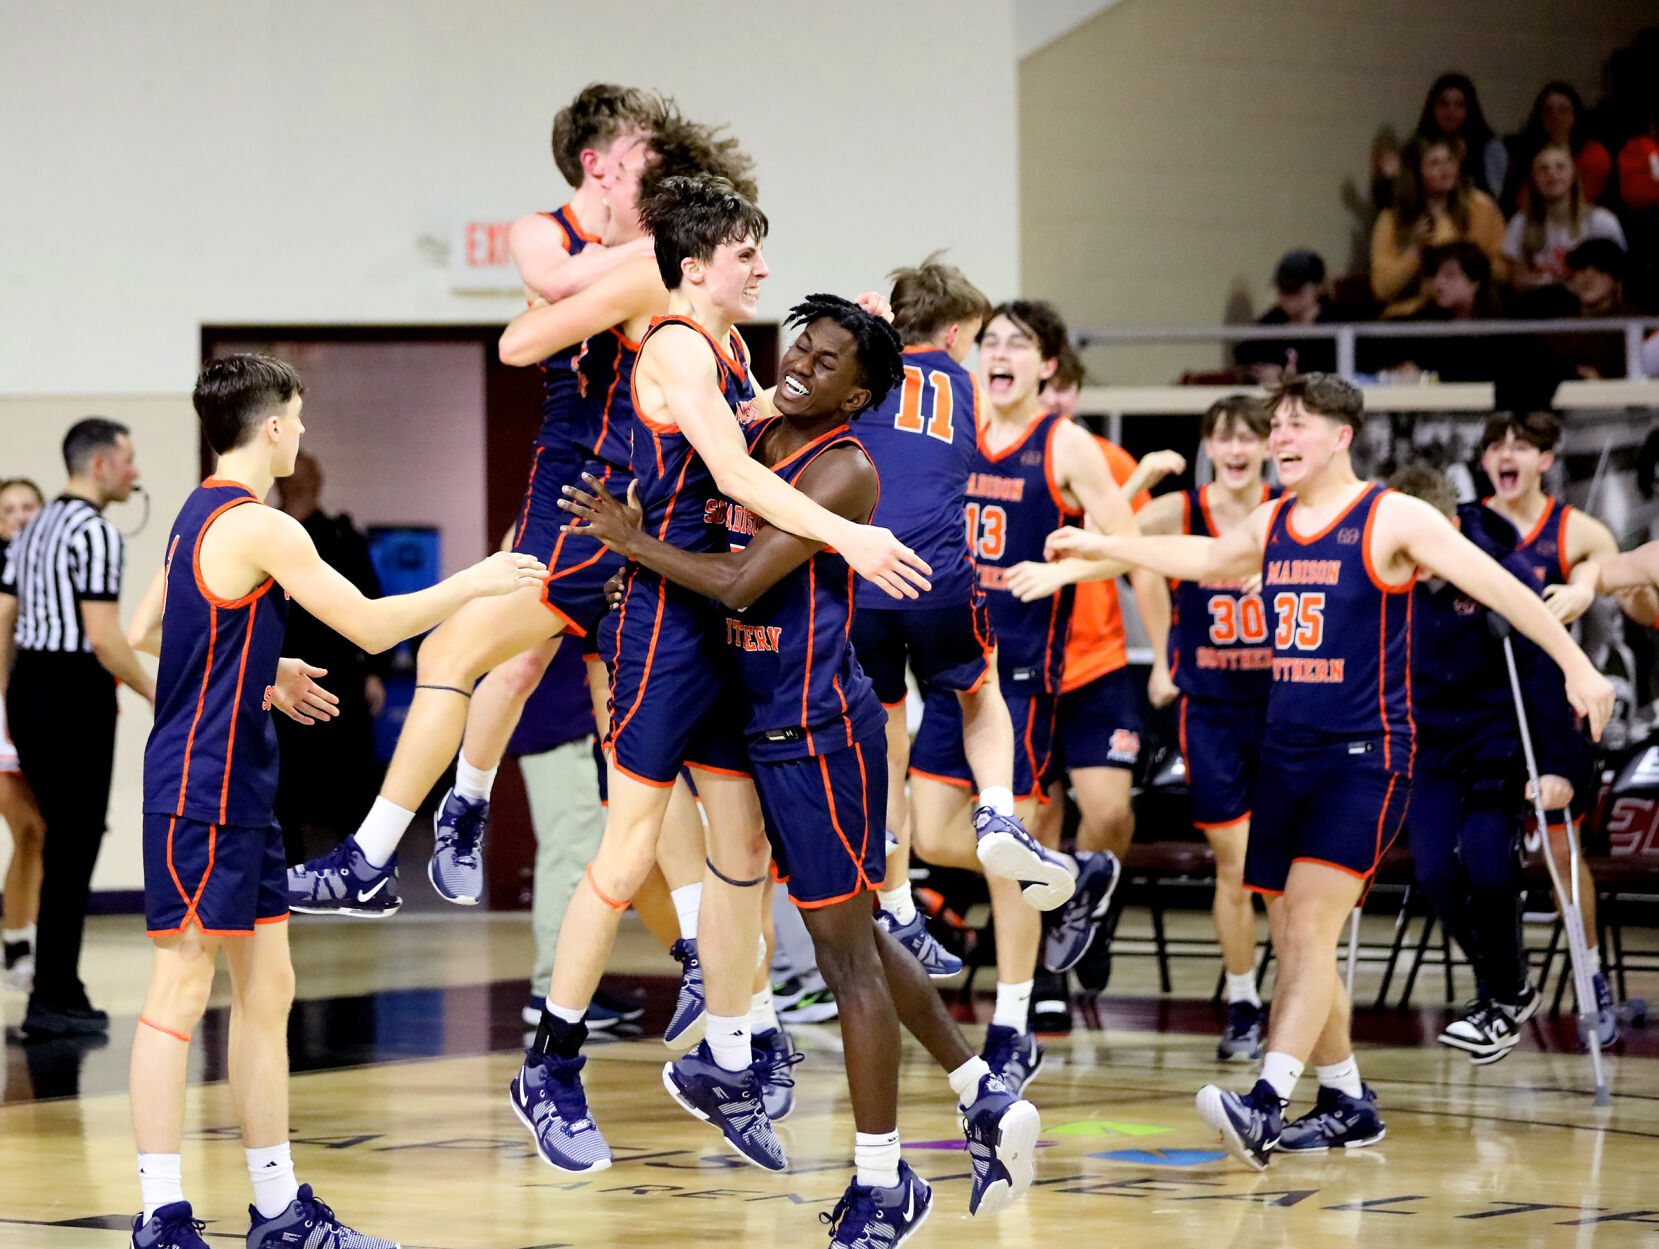 Madison Southern Eagles Win 44th District Boys Championship with Jay Rose and Zach Hudson Leading the Charge